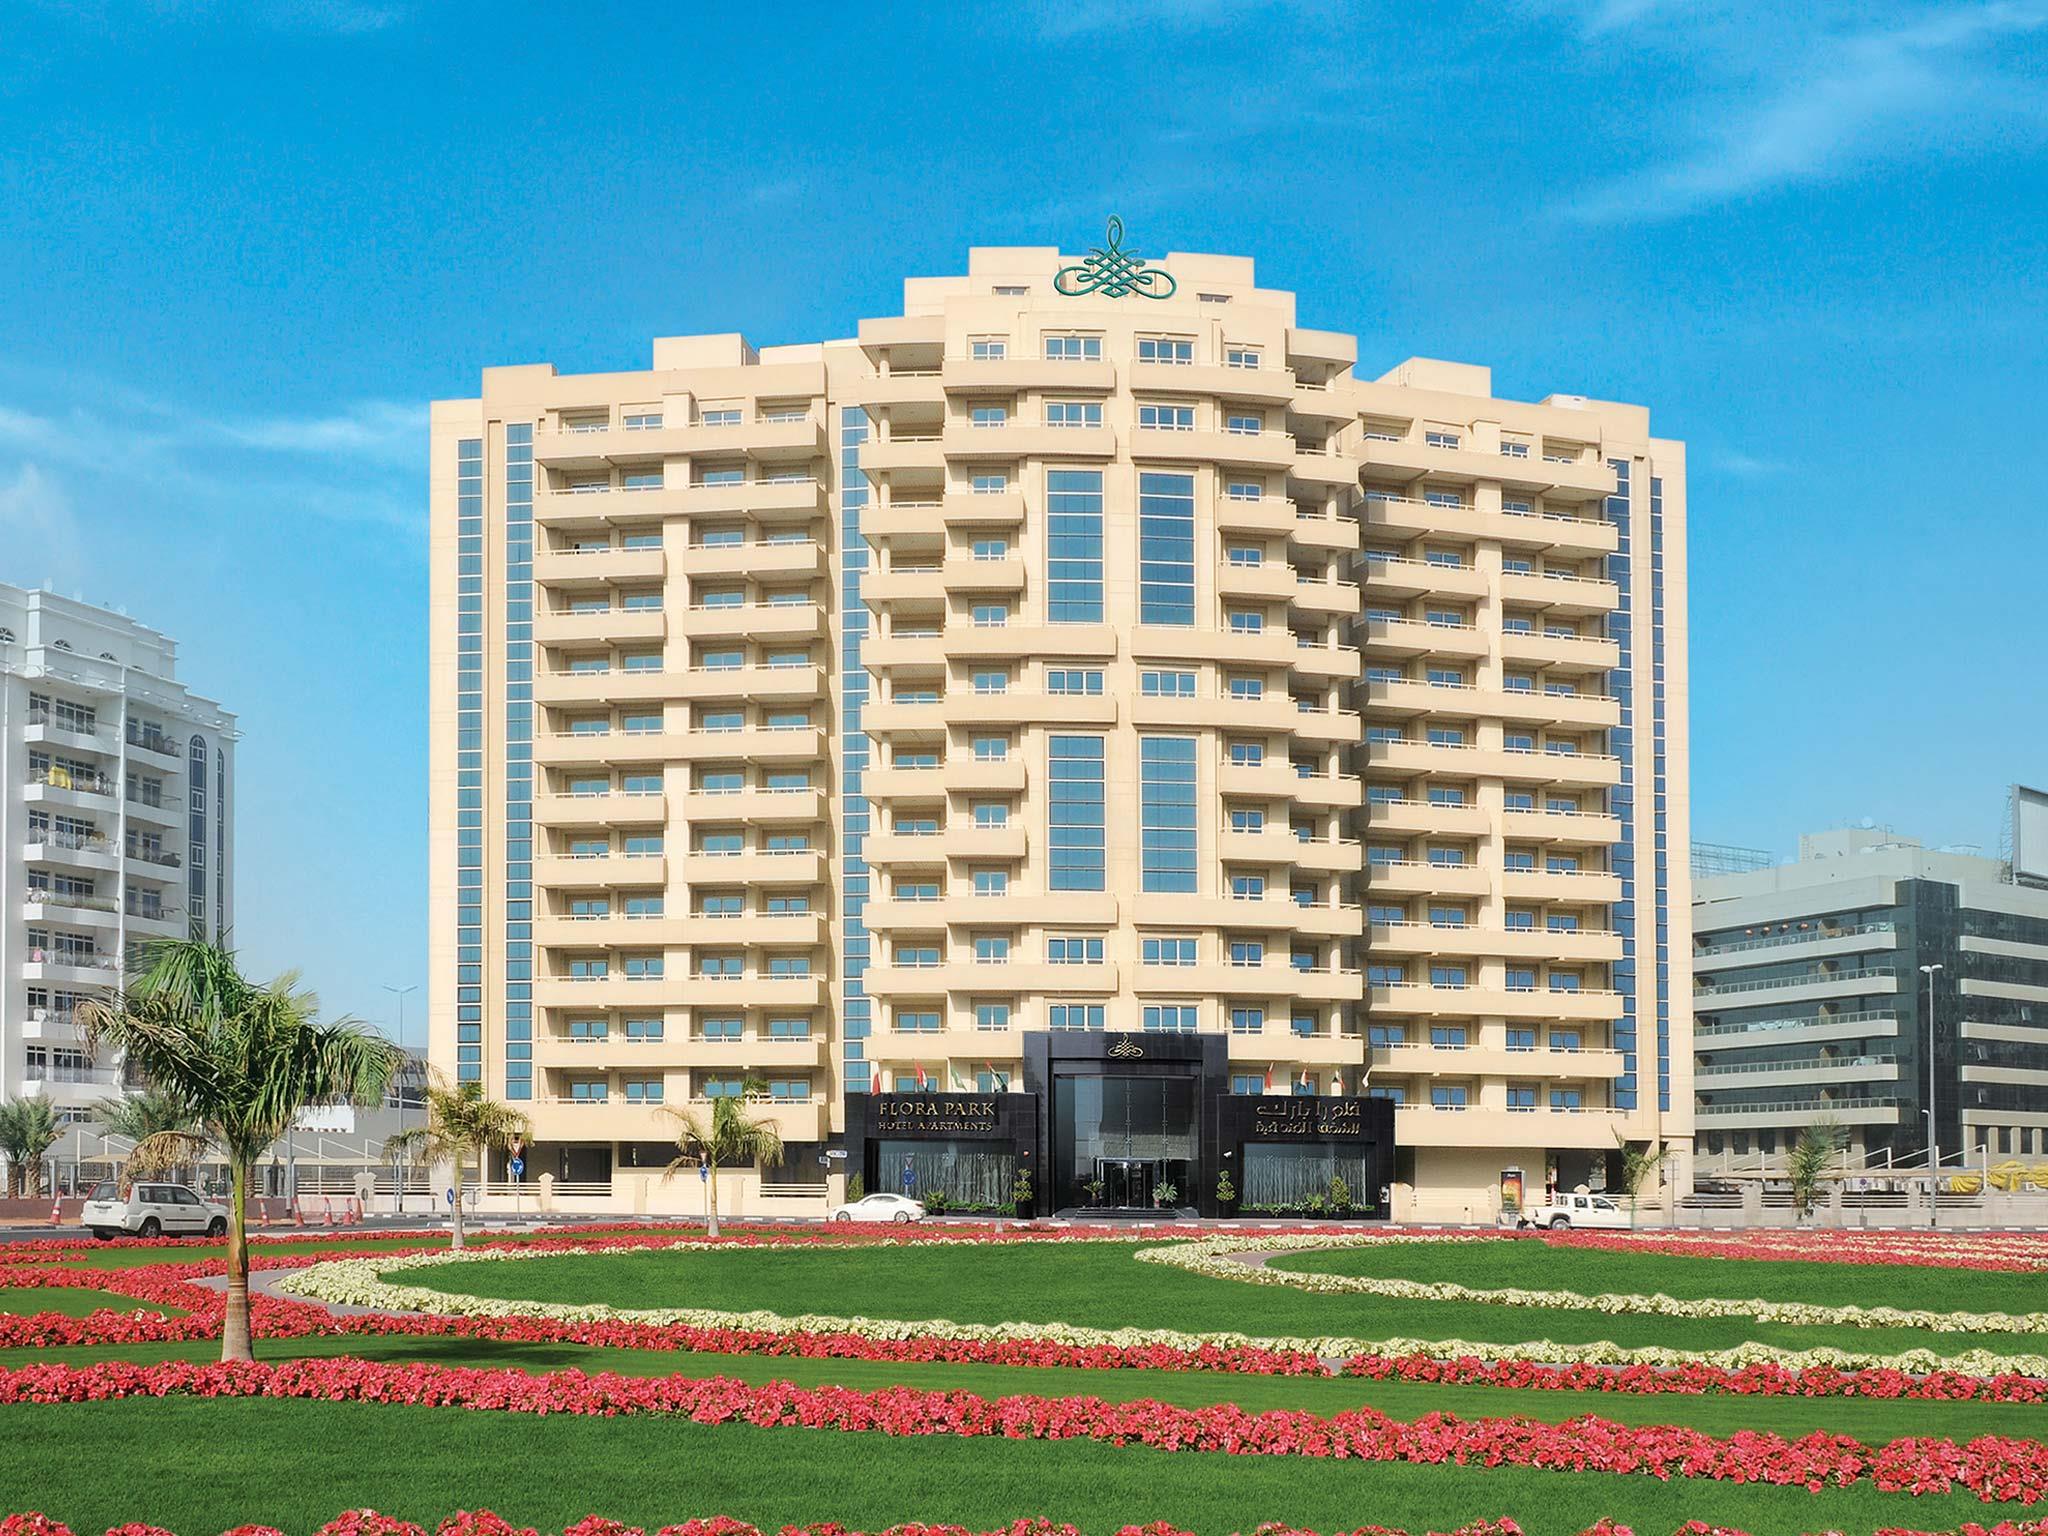 Flora Park Deluxe Hotel Apartments Emirate of Dubai FAQ 2016, What facilities are there in Flora Park Deluxe Hotel Apartments Emirate of Dubai 2016, What Languages Spoken are Supported in Flora Park Deluxe Hotel Apartments Emirate of Dubai 2016, Which payment cards are accepted in Flora Park Deluxe Hotel Apartments Emirate of Dubai , Emirate of Dubai Flora Park Deluxe Hotel Apartments room facilities and services Q&A 2016, Emirate of Dubai Flora Park Deluxe Hotel Apartments online booking services 2016, Emirate of Dubai Flora Park Deluxe Hotel Apartments address 2016, Emirate of Dubai Flora Park Deluxe Hotel Apartments telephone number 2016,Emirate of Dubai Flora Park Deluxe Hotel Apartments map 2016, Emirate of Dubai Flora Park Deluxe Hotel Apartments traffic guide 2016, how to go Emirate of Dubai Flora Park Deluxe Hotel Apartments, Emirate of Dubai Flora Park Deluxe Hotel Apartments booking online 2016, Emirate of Dubai Flora Park Deluxe Hotel Apartments room types 2016.